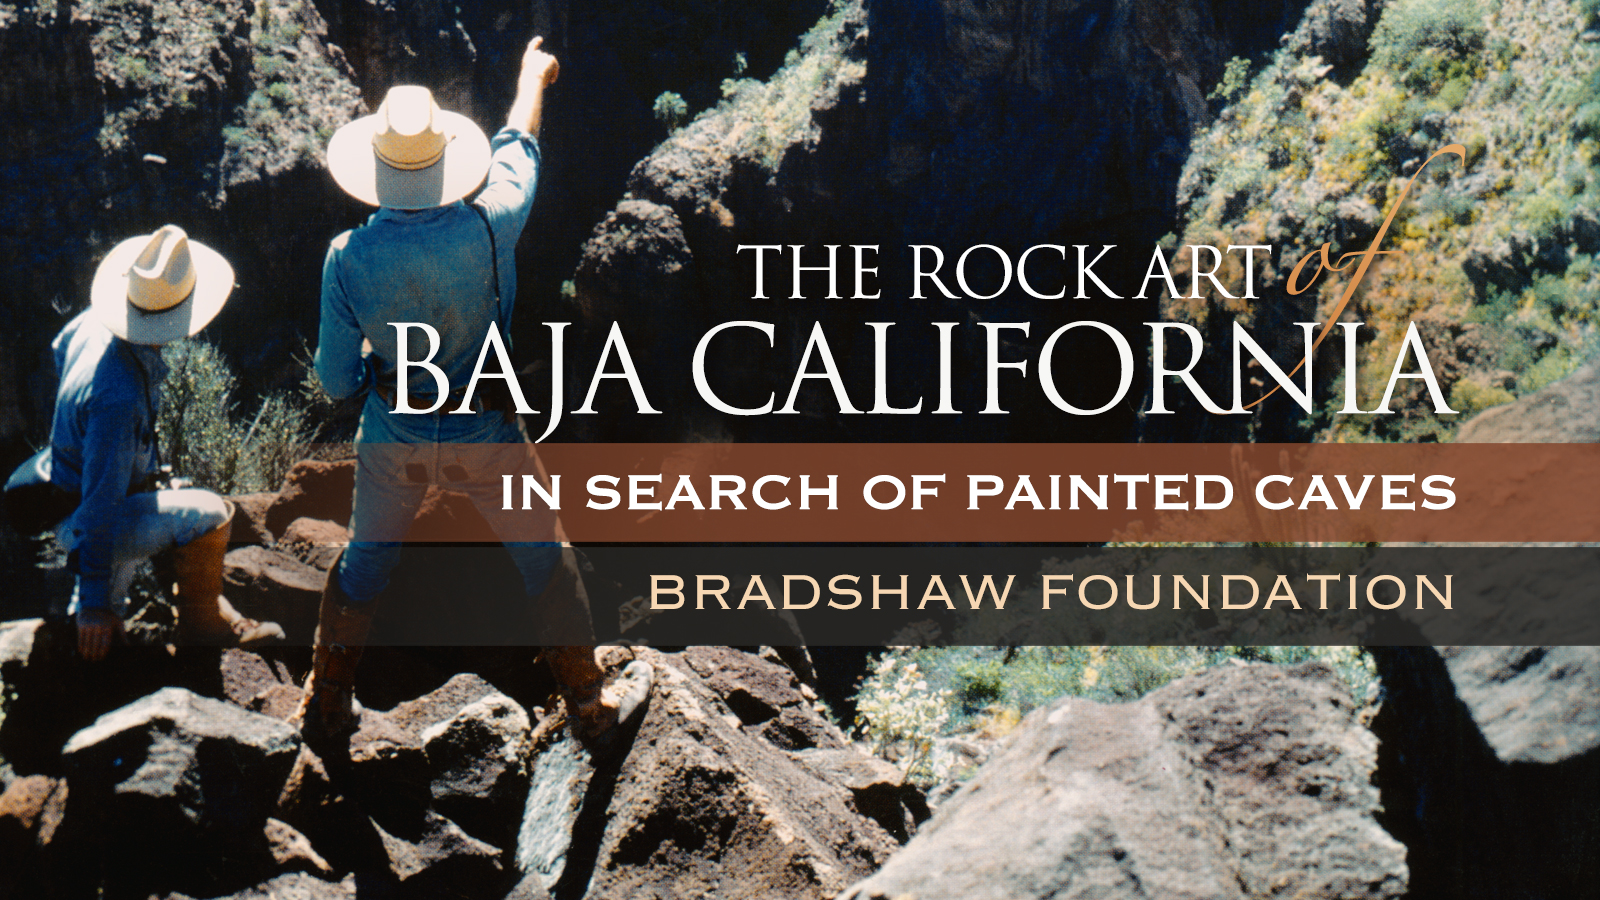 Rock Art America USA Bradshaw Foundation Baja California In Search of Painted Cave Mexico Petroglyphs Pictographs Archaeology Prehistory